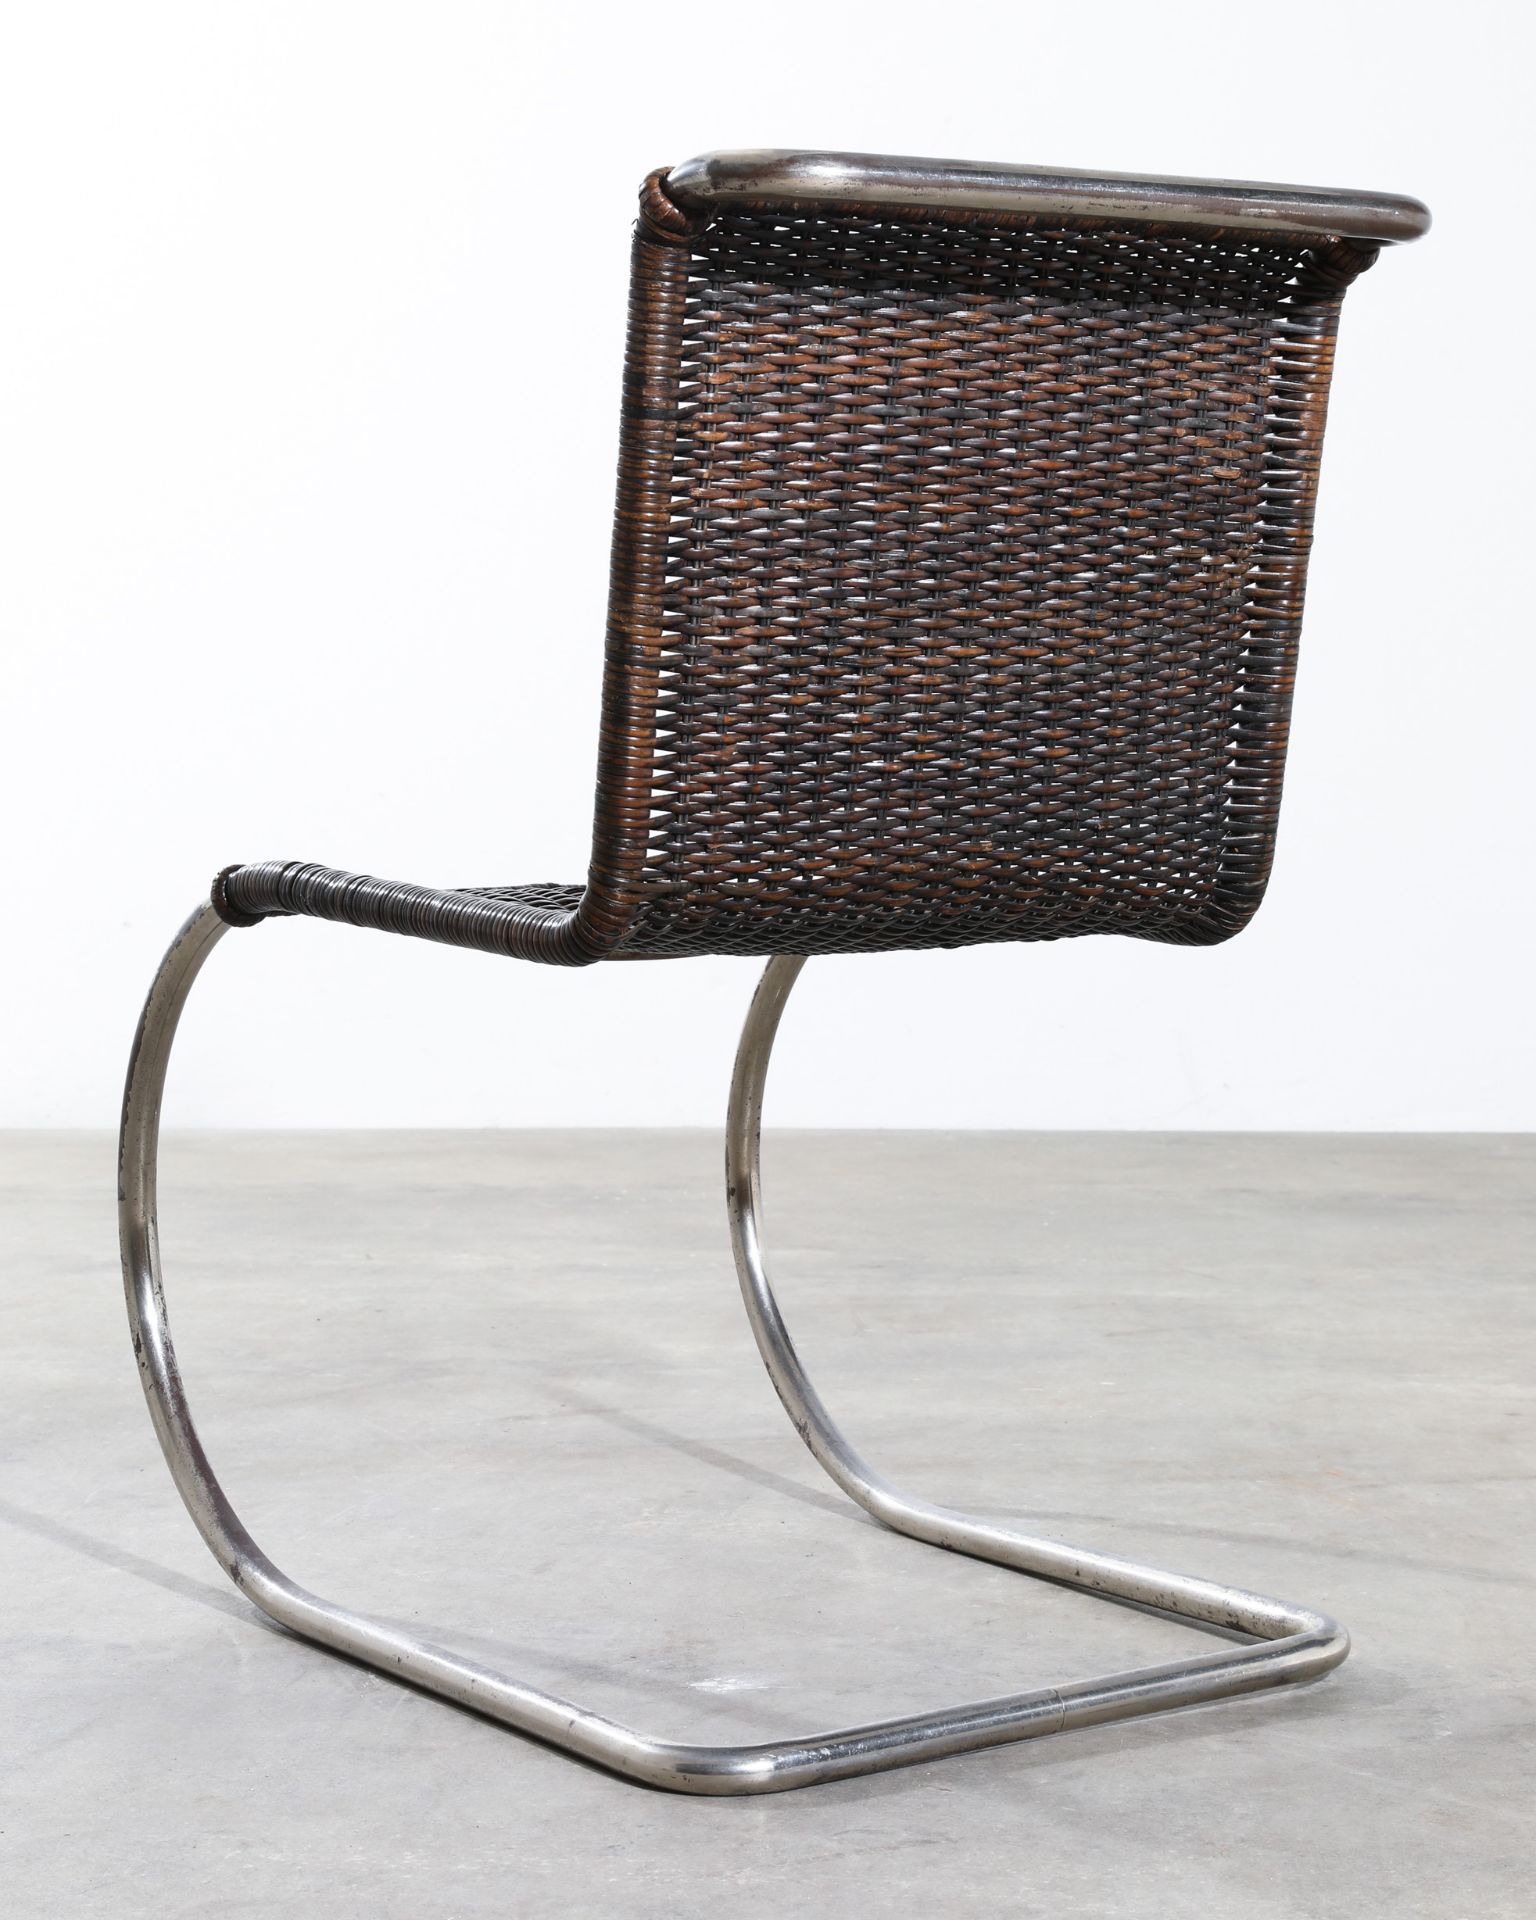 L. Mies van der Rohe, Thonet, early Chair Model MR10 / MR533 - Image 2 of 6